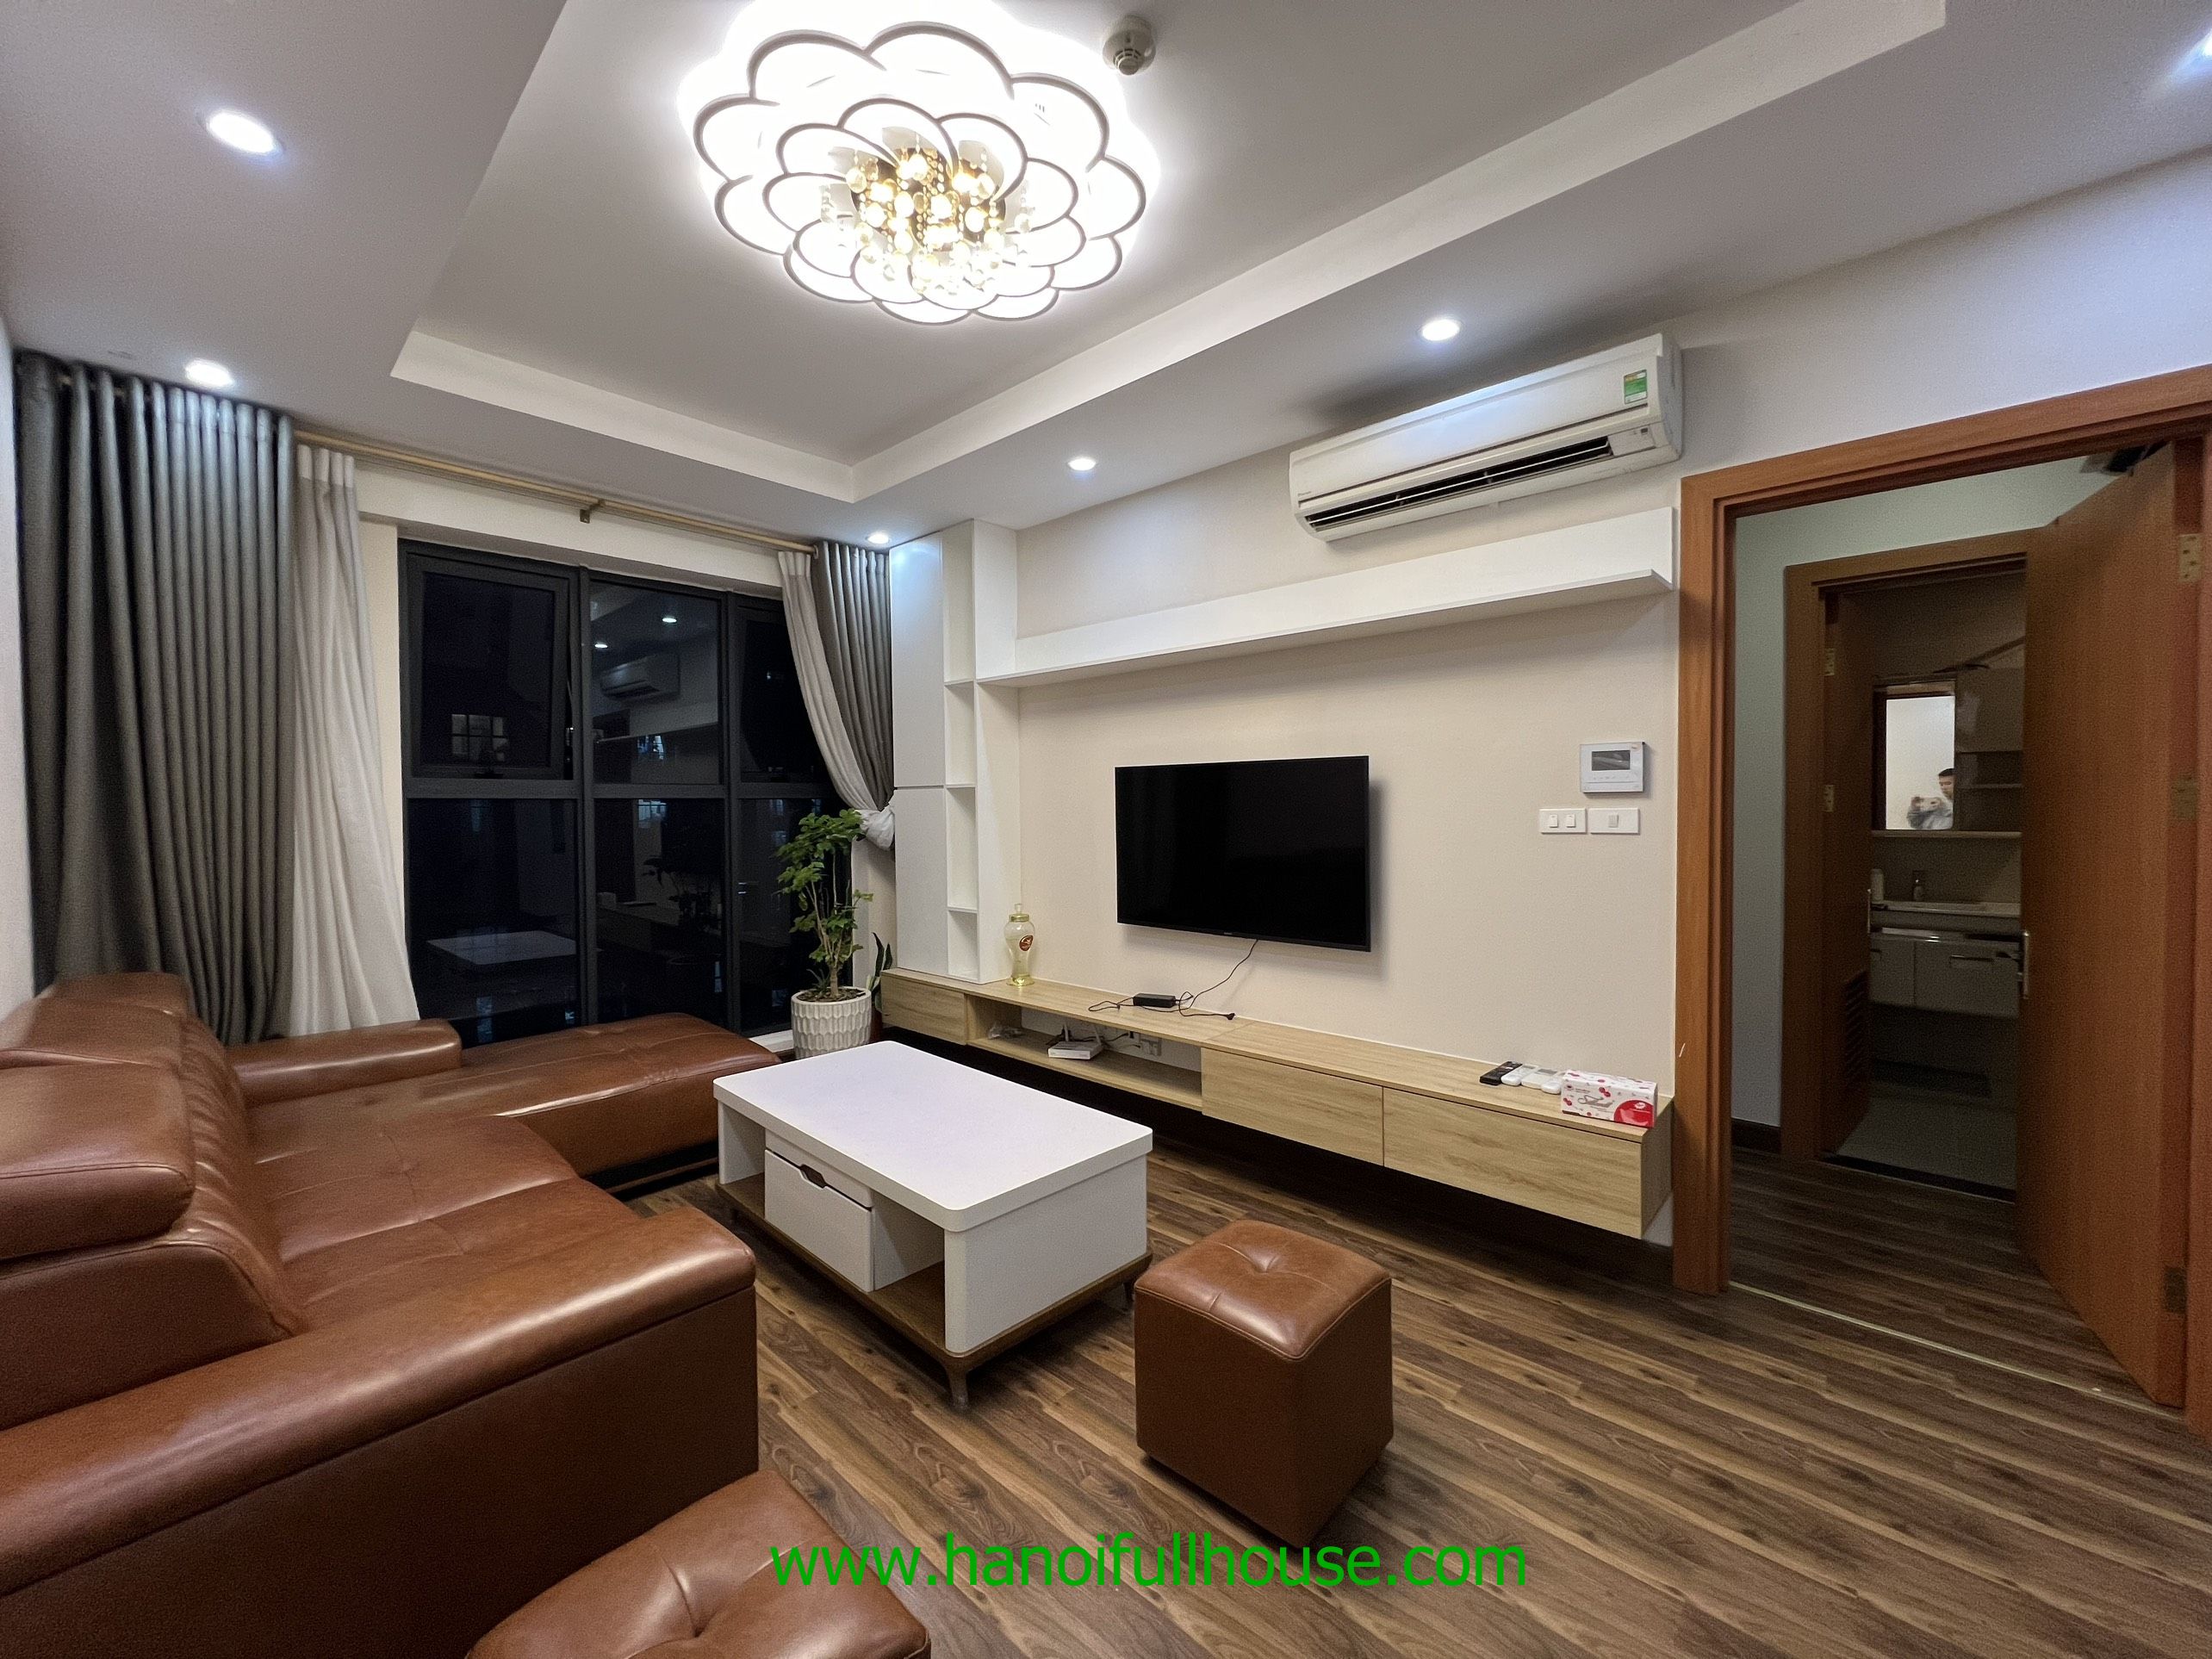 For rent 2 bedroom apartment with full furniture in Goldmark Ho Tung Mau